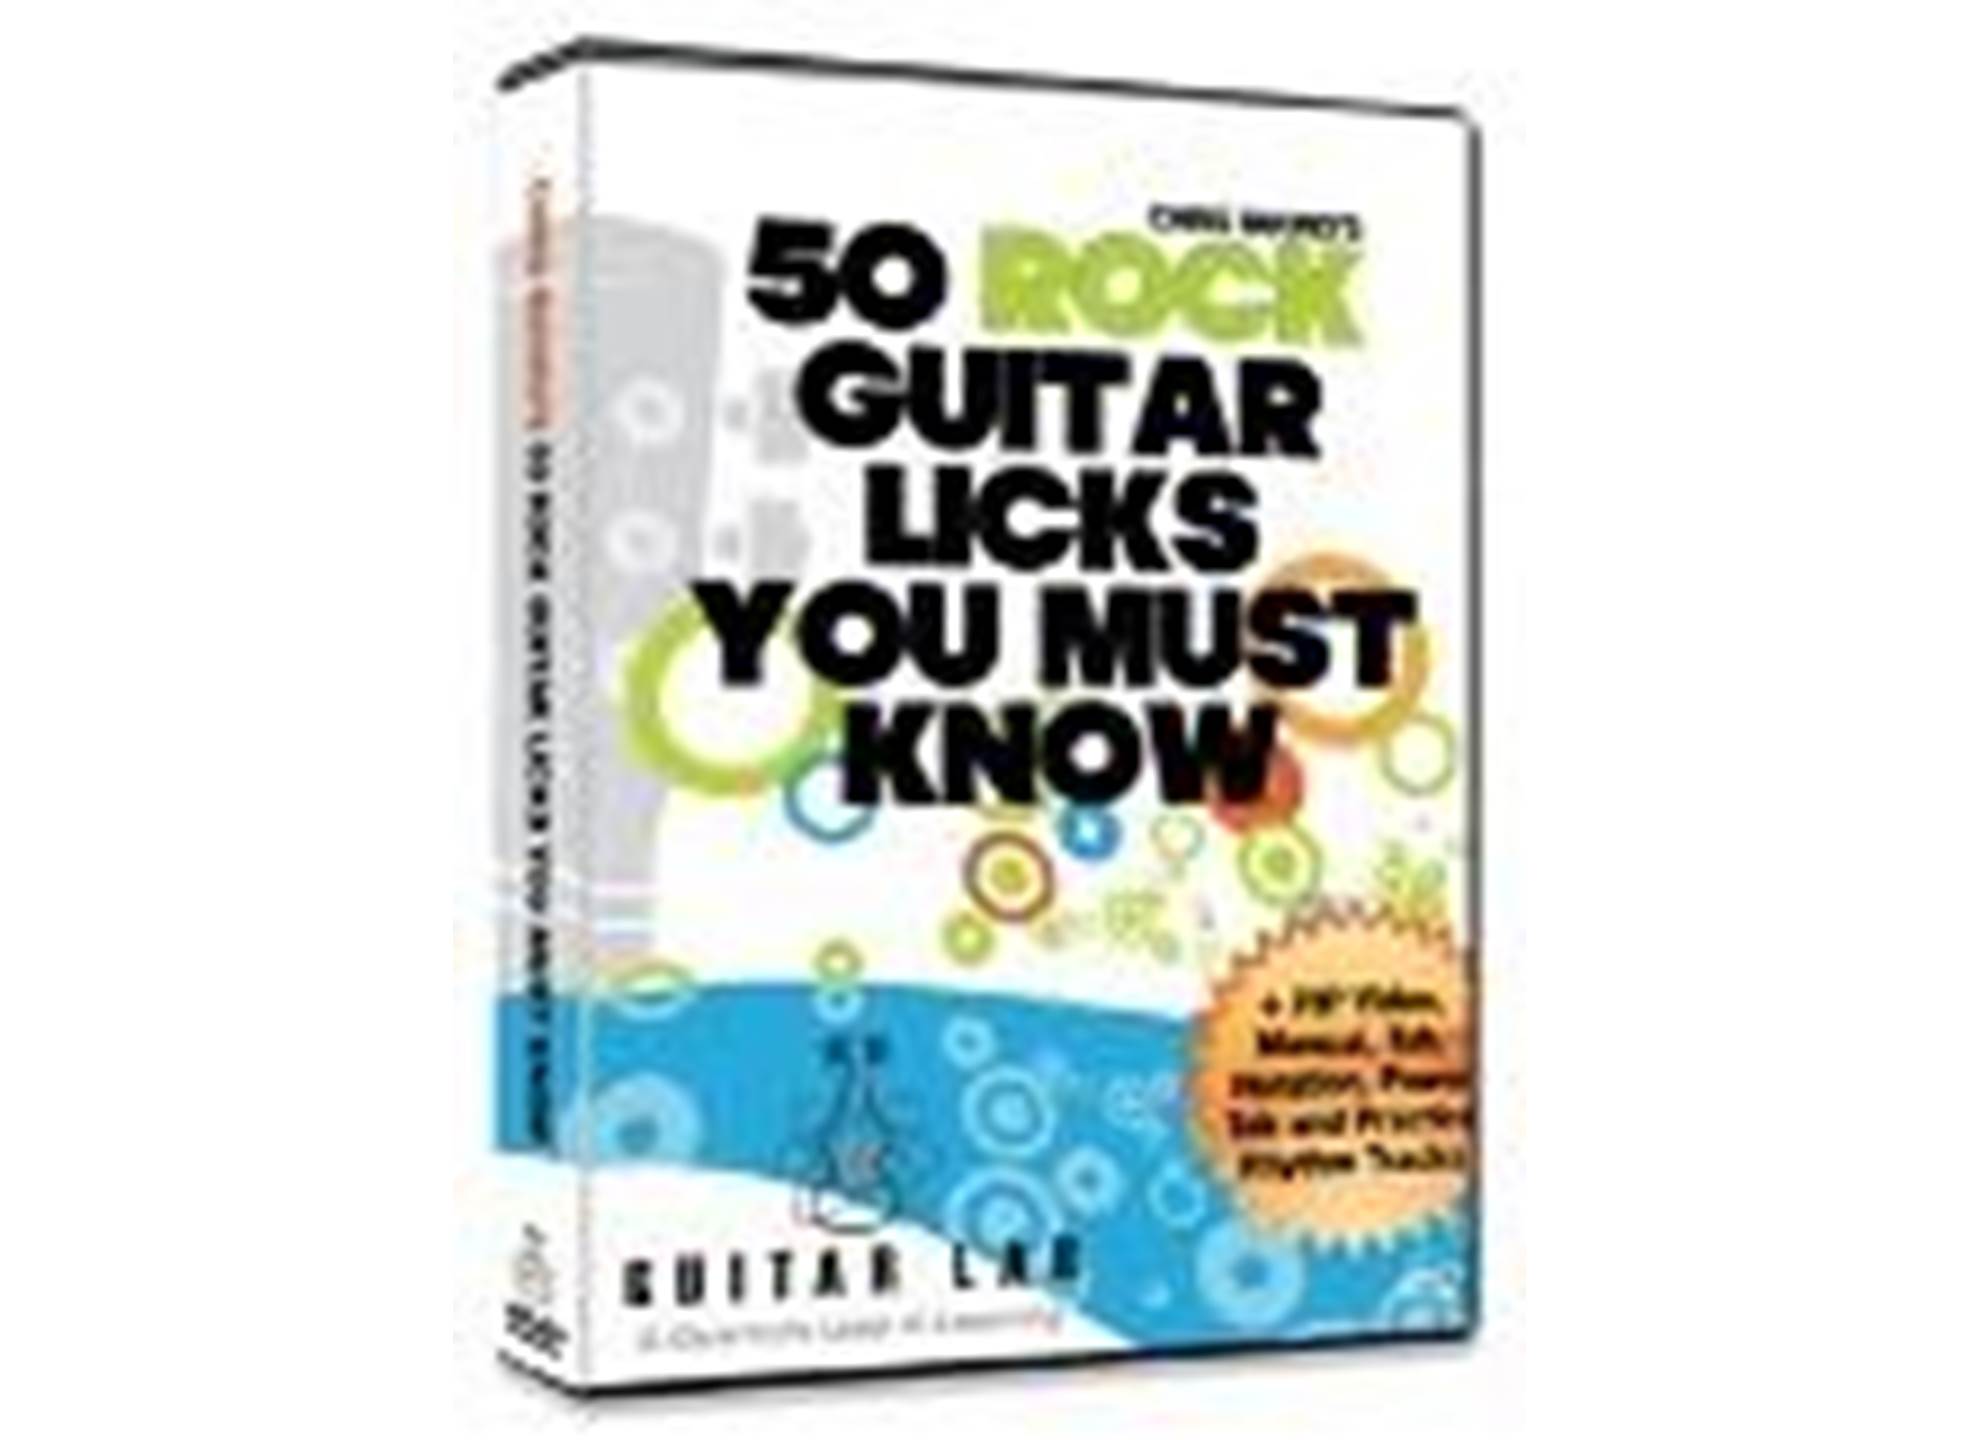 50 Rock Guitar Licks You Must Know